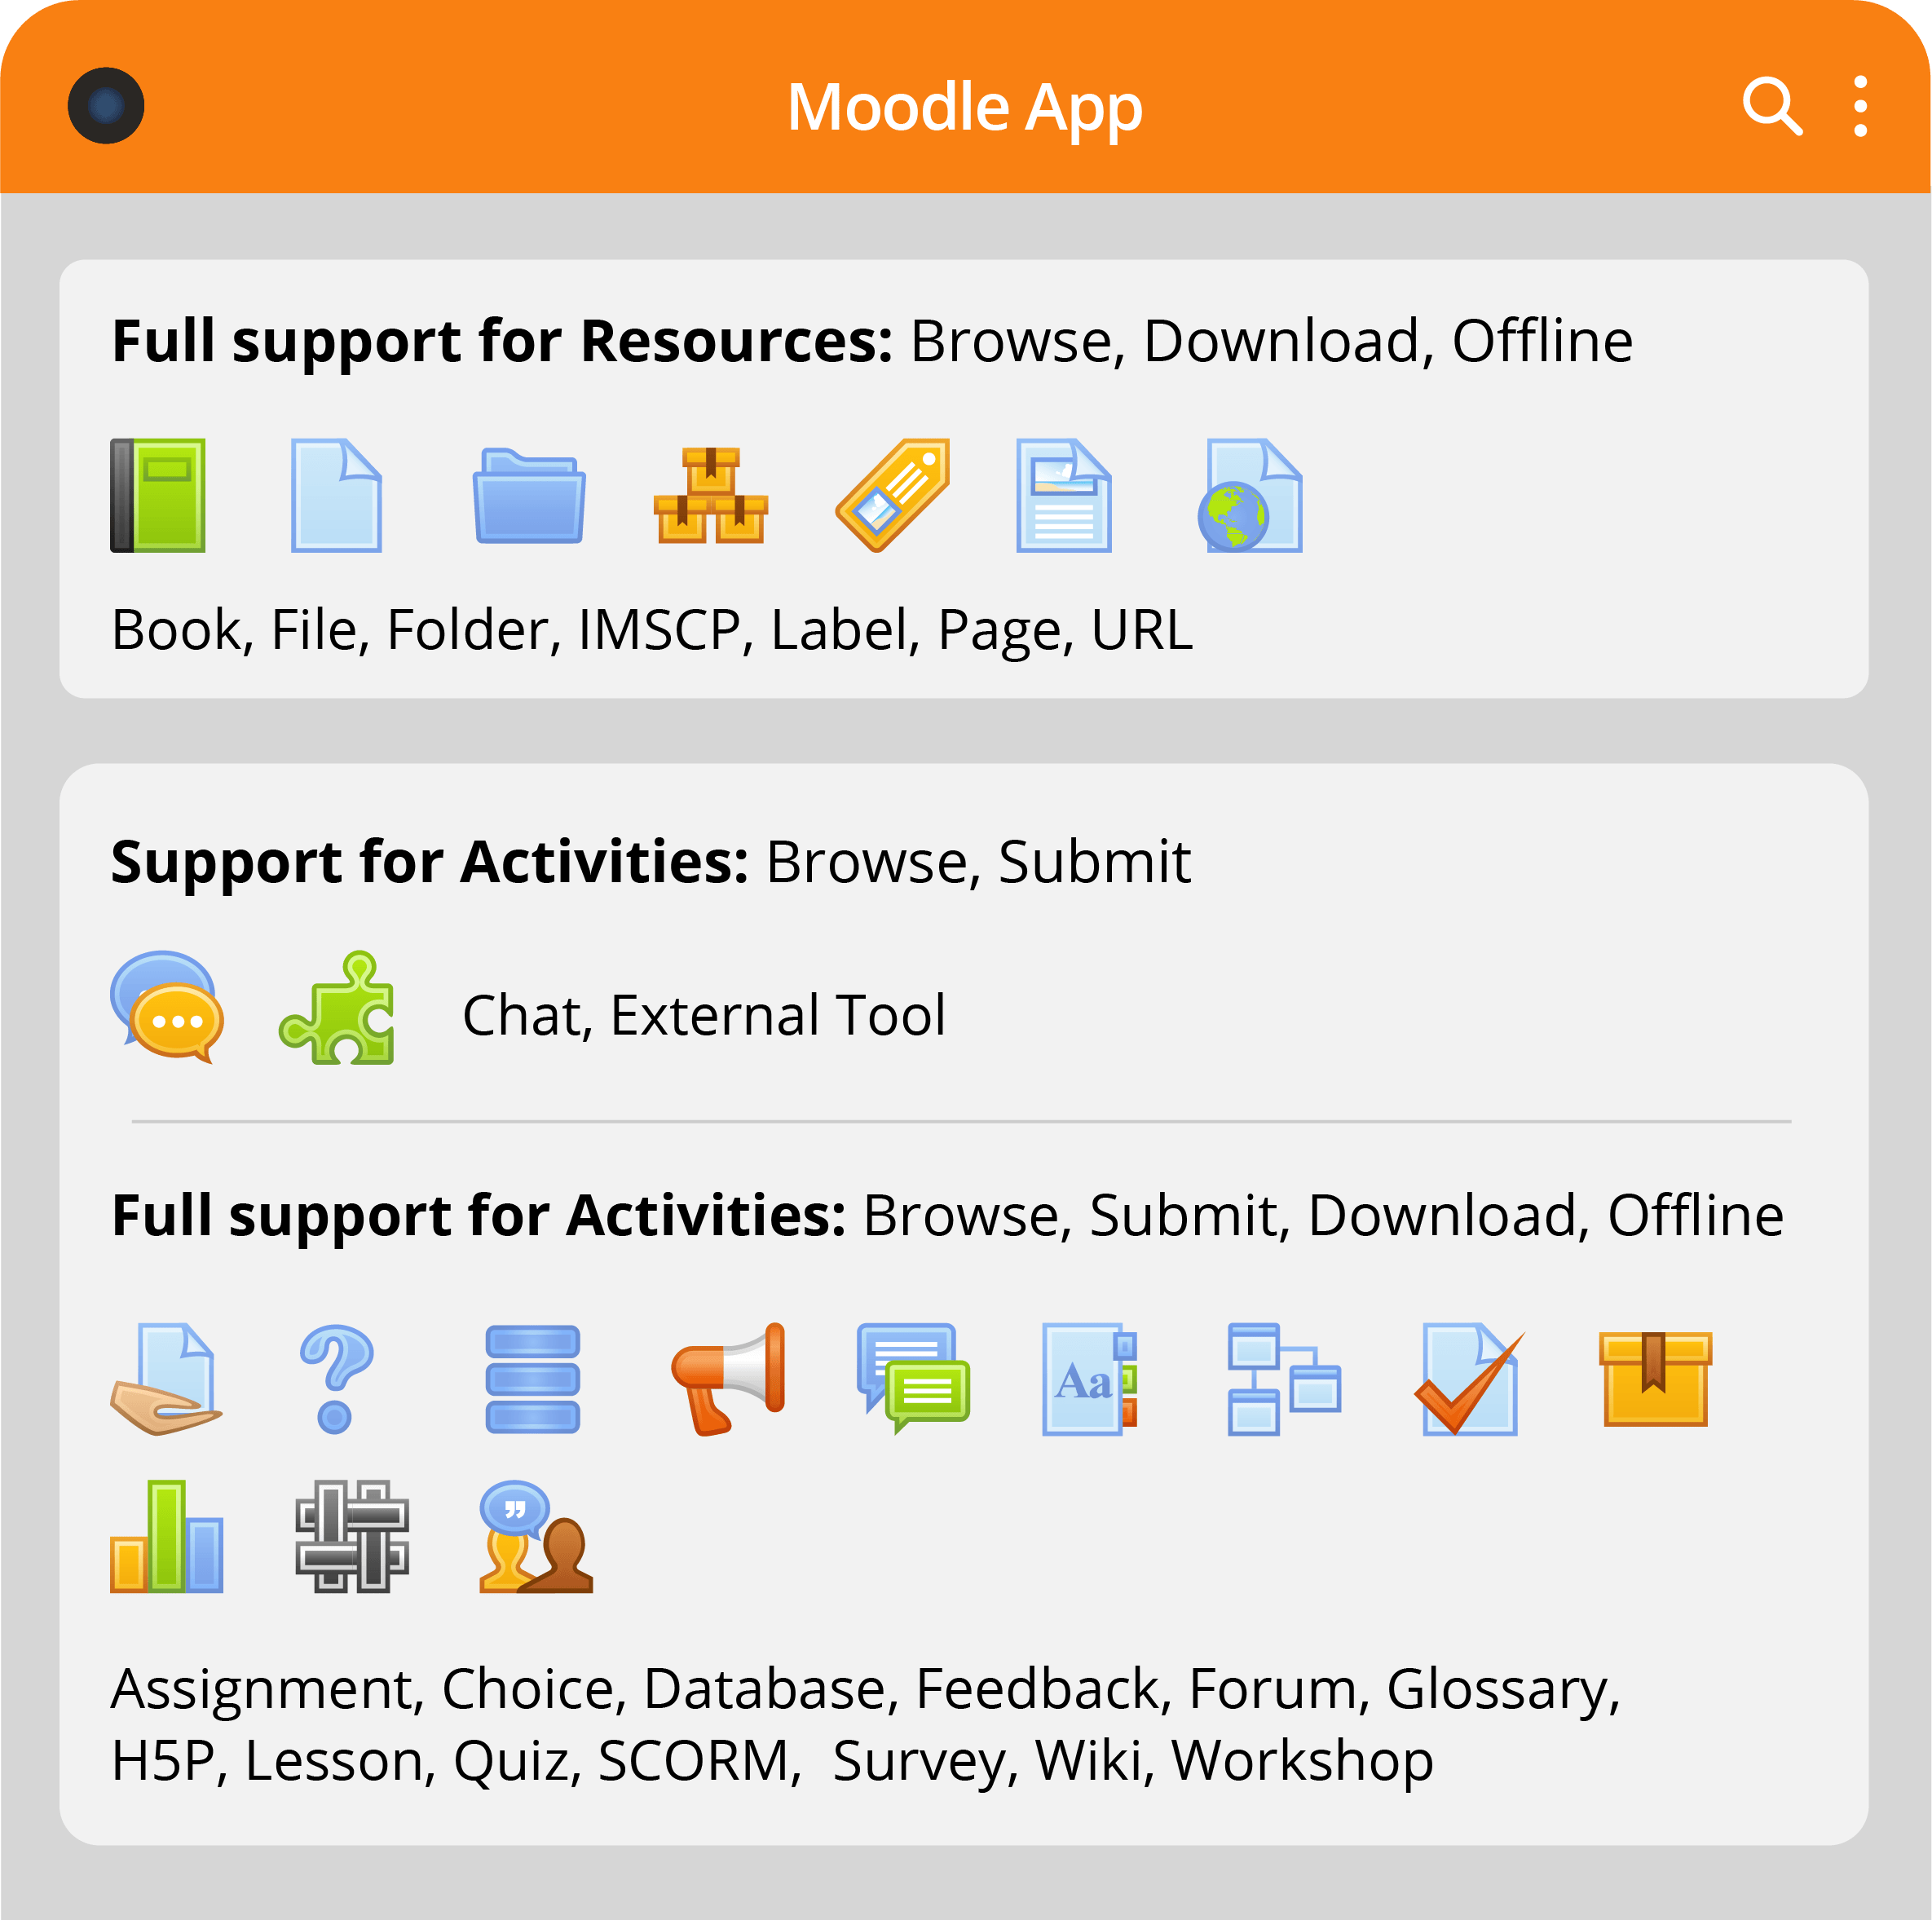 Moodle App. Full support for Moodle resources to browse, download and work offline: book, file, folder, IMSCP, label, page, URL. Full support for Activities to browse, submit, download and work offline: assignment, choice, database, feedback, forum, glossary, H5P, lesson, quiz, SCORM, survey, wiki, Workshop. Support for Activities to browse and submit: chat, external tools.